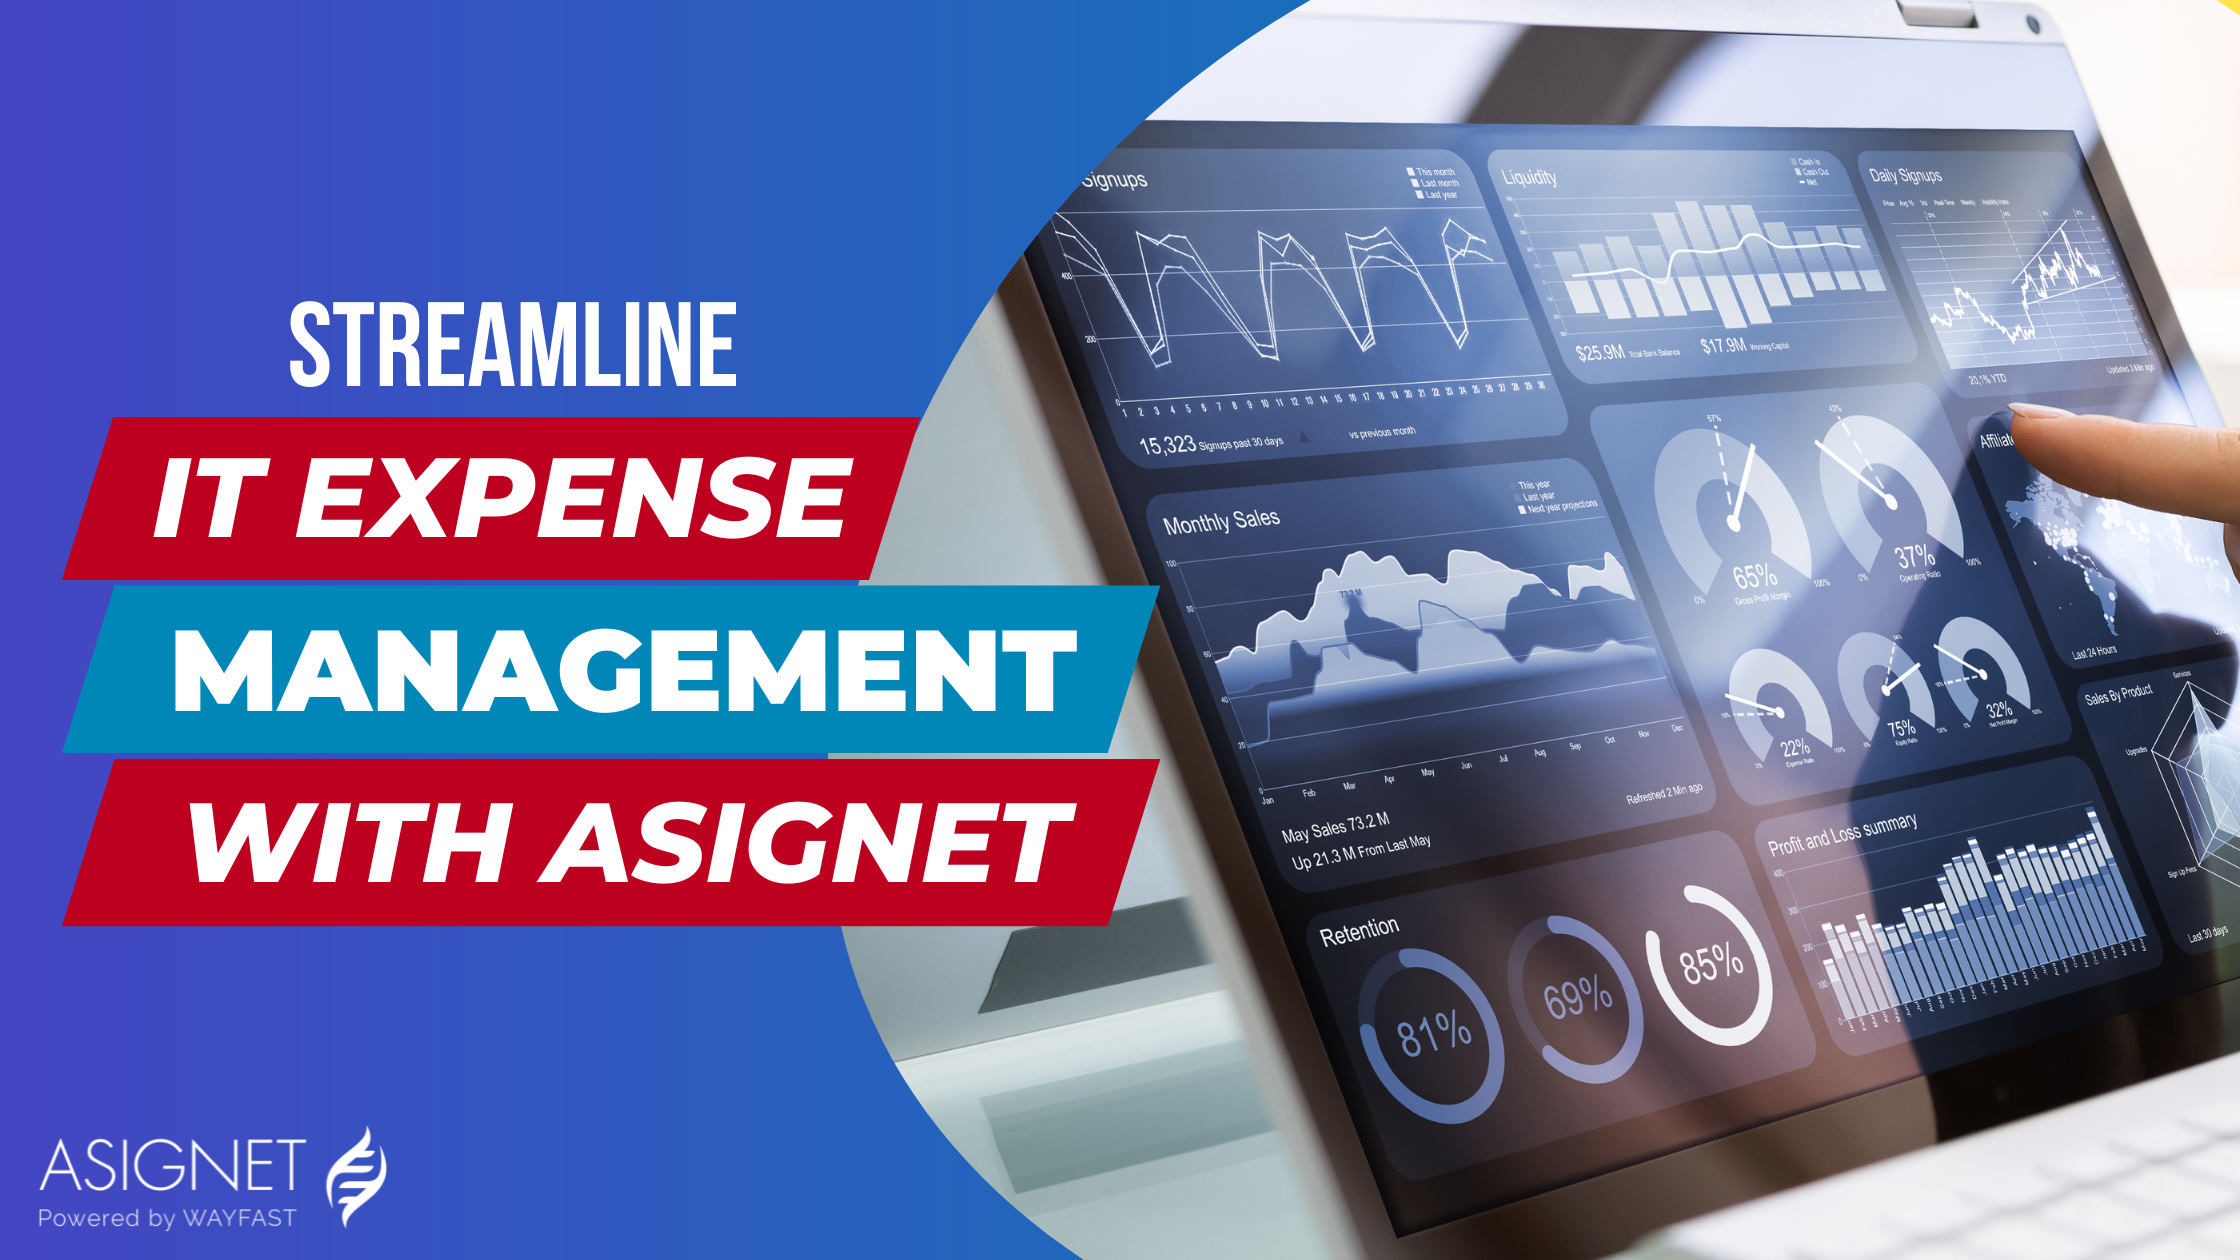 How Asignet's Solution Helps Streamline IT Expense Management